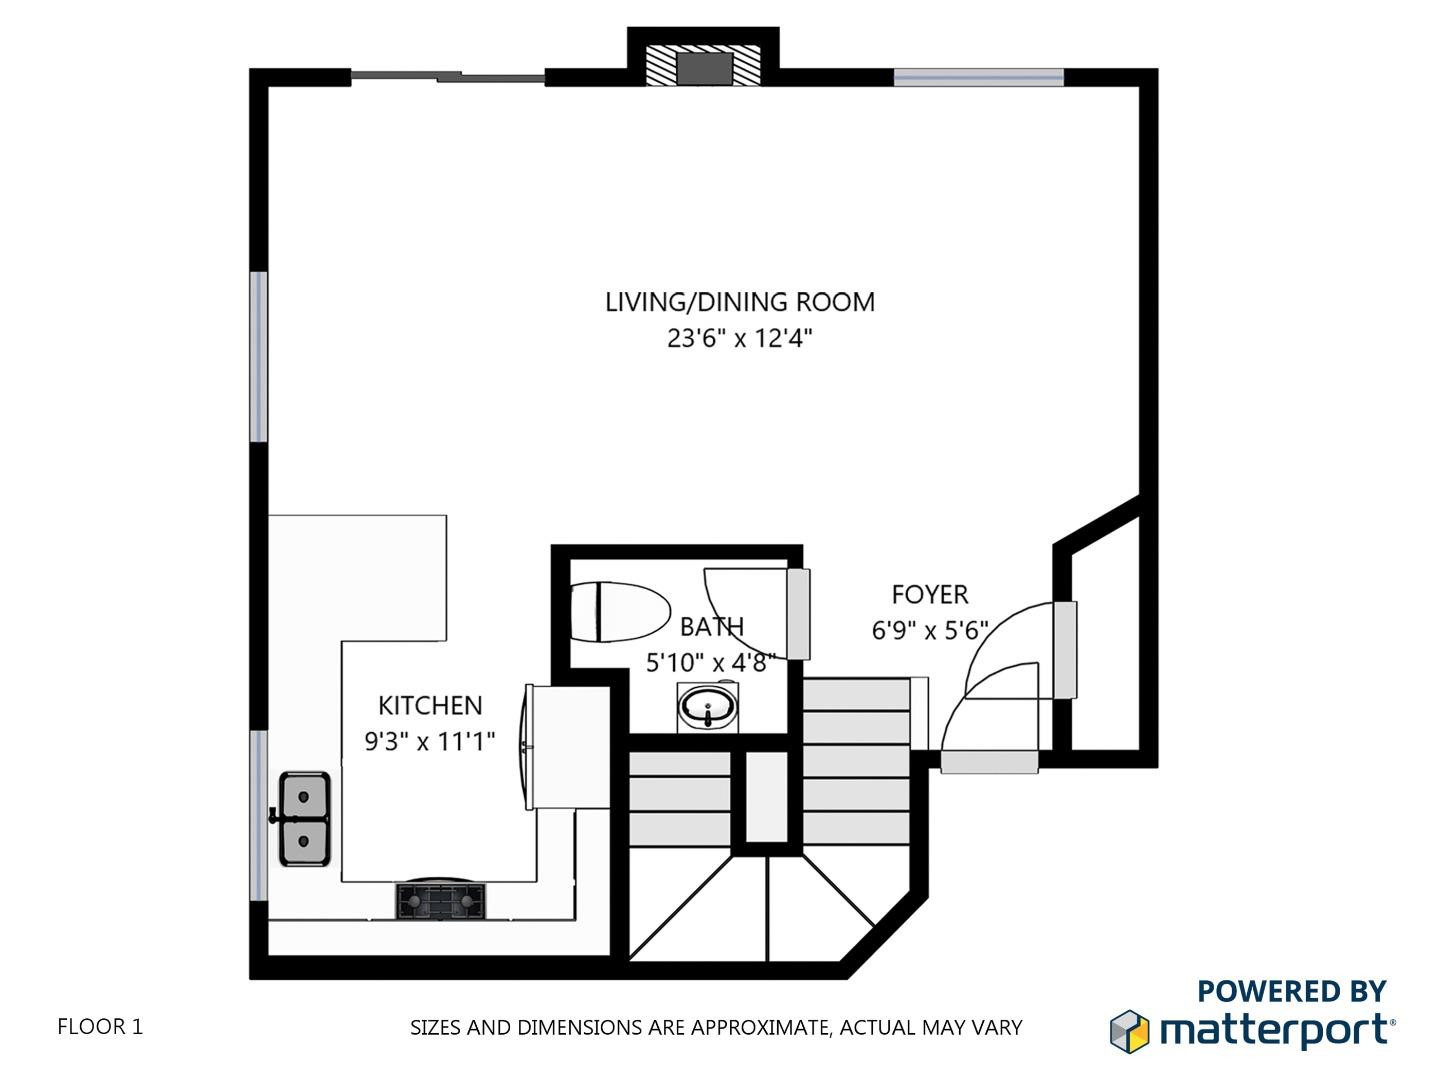 hardwood floor repair san jose of mls81652218 599888 www kellydippel com 479 marble arch avenue in ready to move in corner unit with abundance of natural light beautifully updated townhouse style condo in the heart of lancaster gate community in